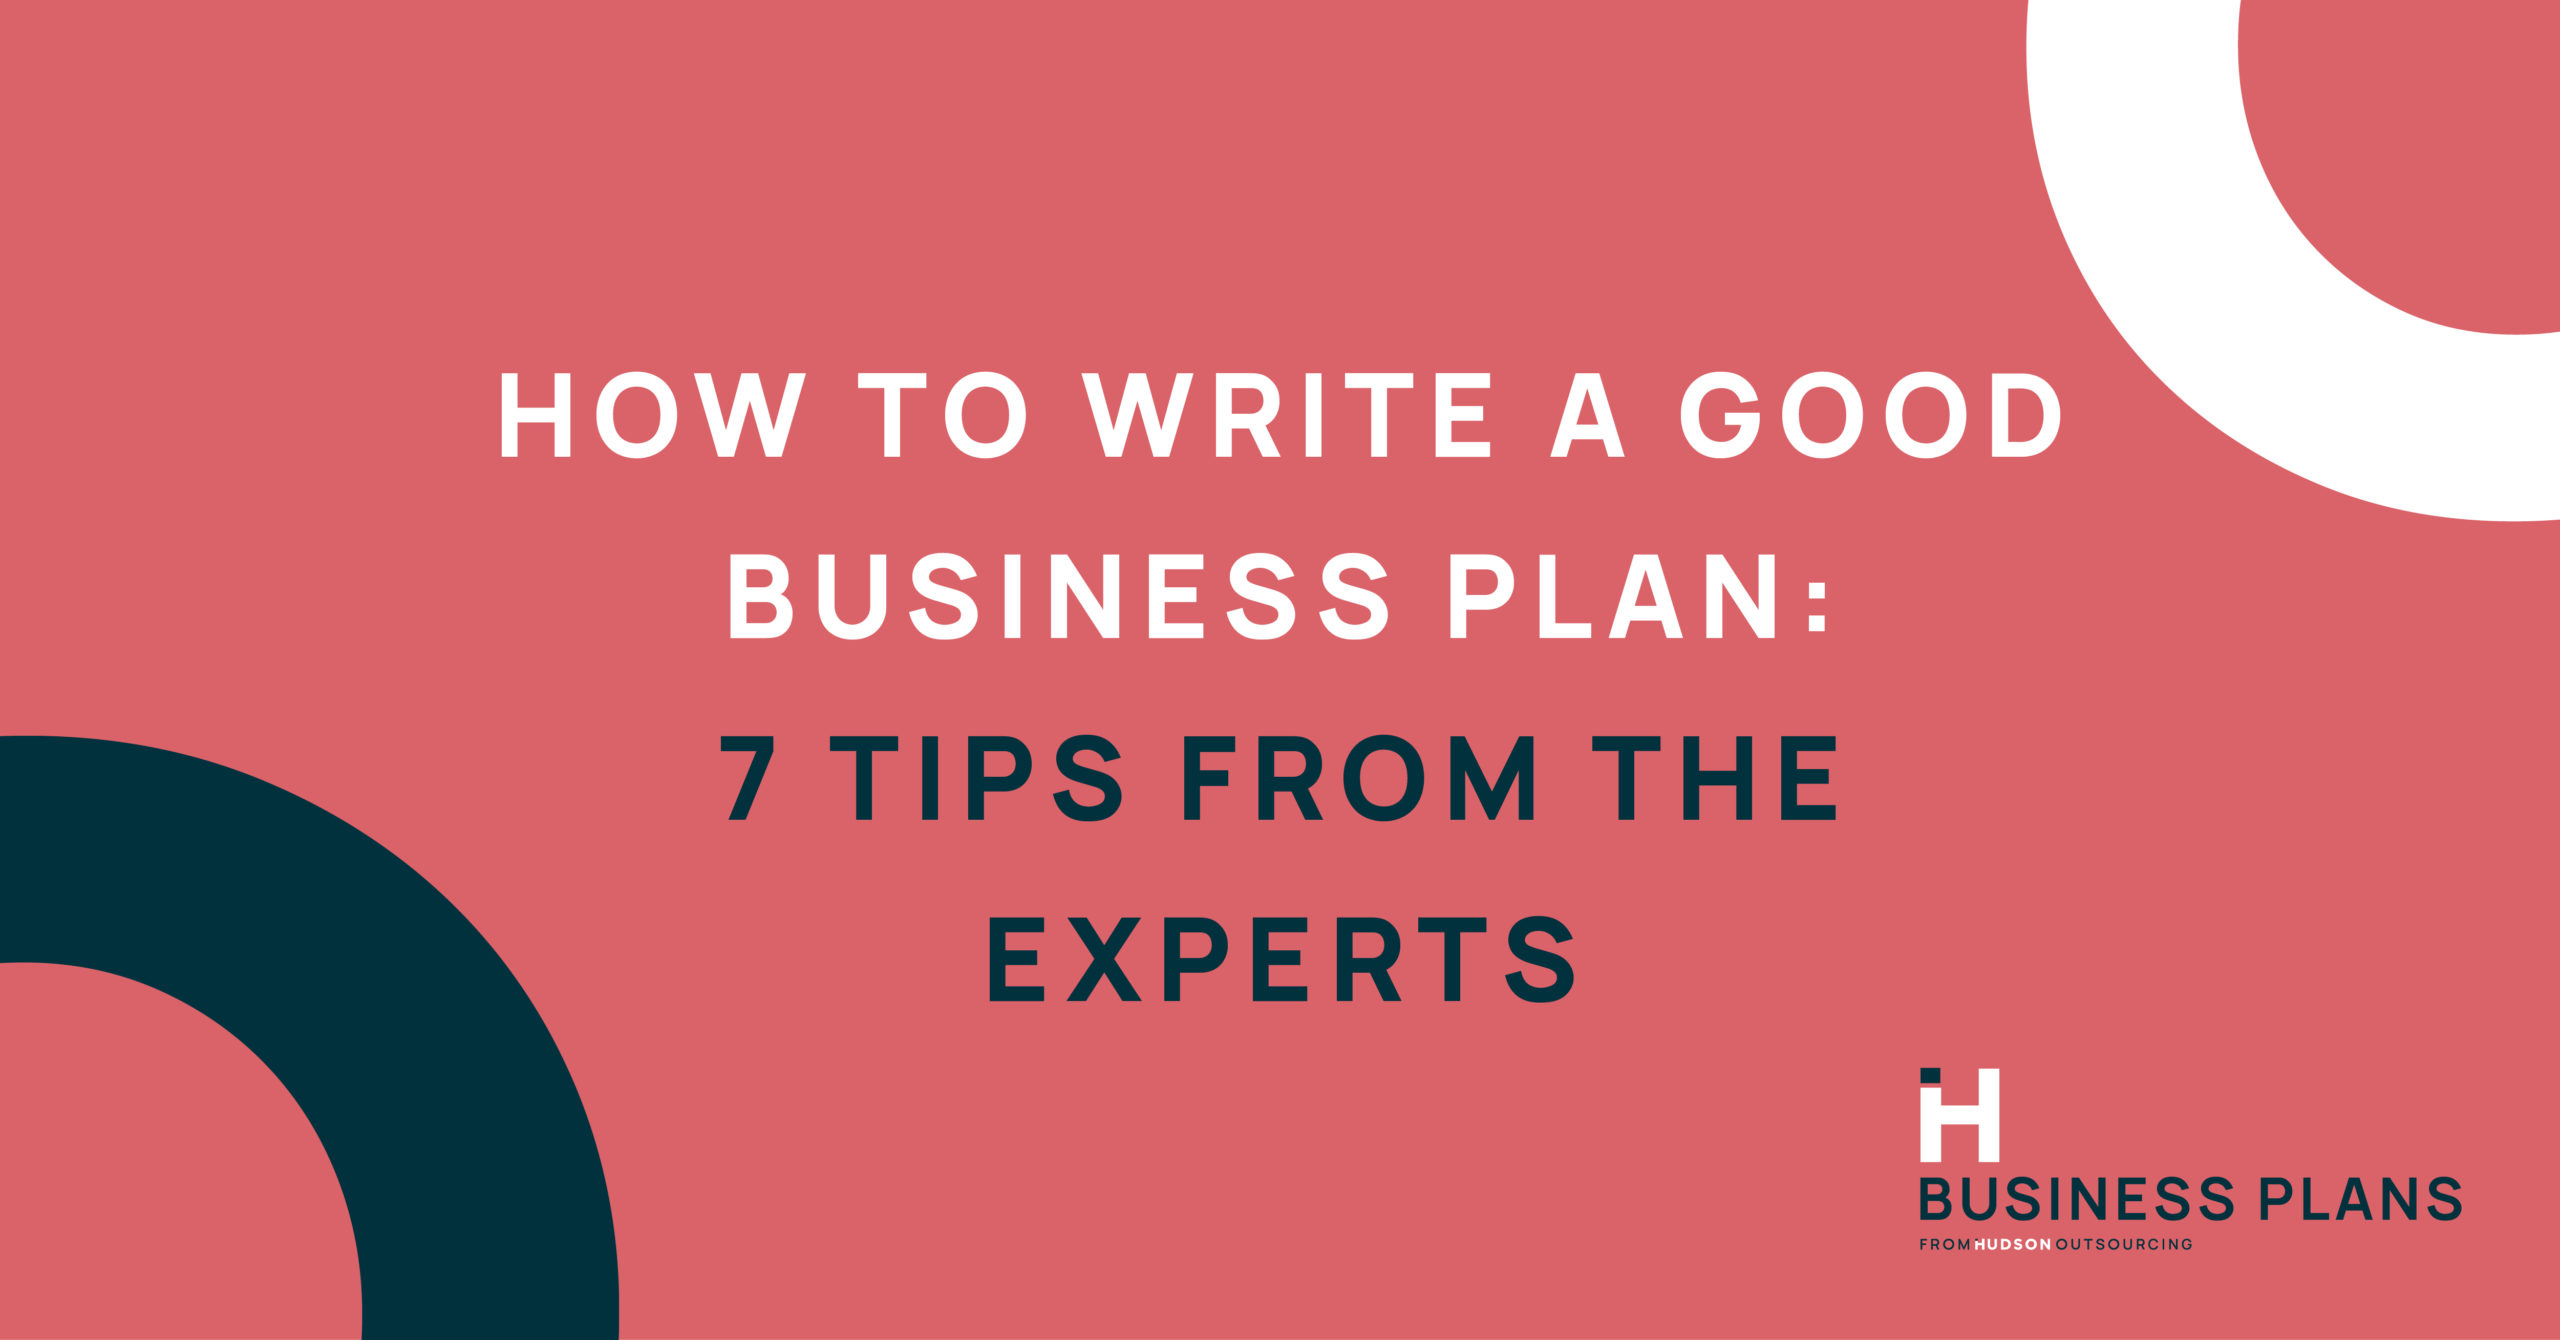 How to Write a Good Business Plan: 7 Tips from the Experts